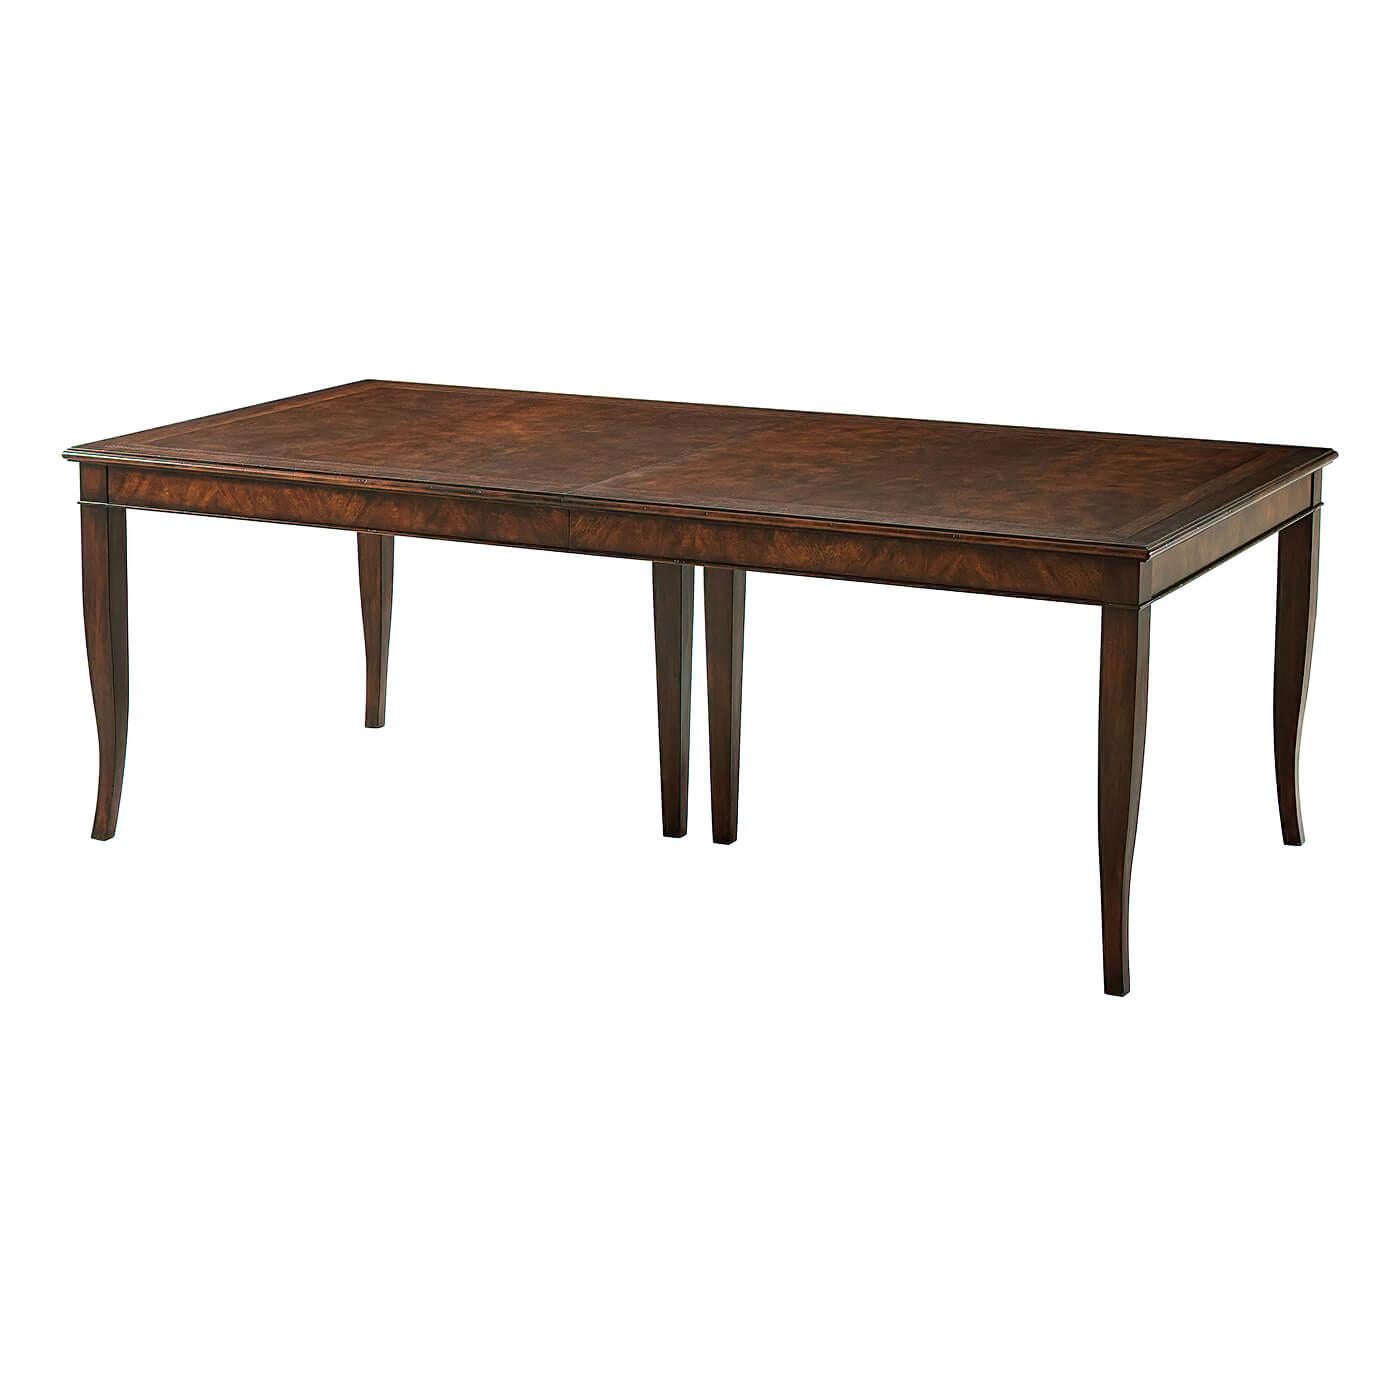 A Provincial veneered and mahogany extending dining table, the crossbanded rectangular top opening to accommodate one additional leaf, the veneered frieze above square tapering and splayed legs. Inspired by a 19th-century French